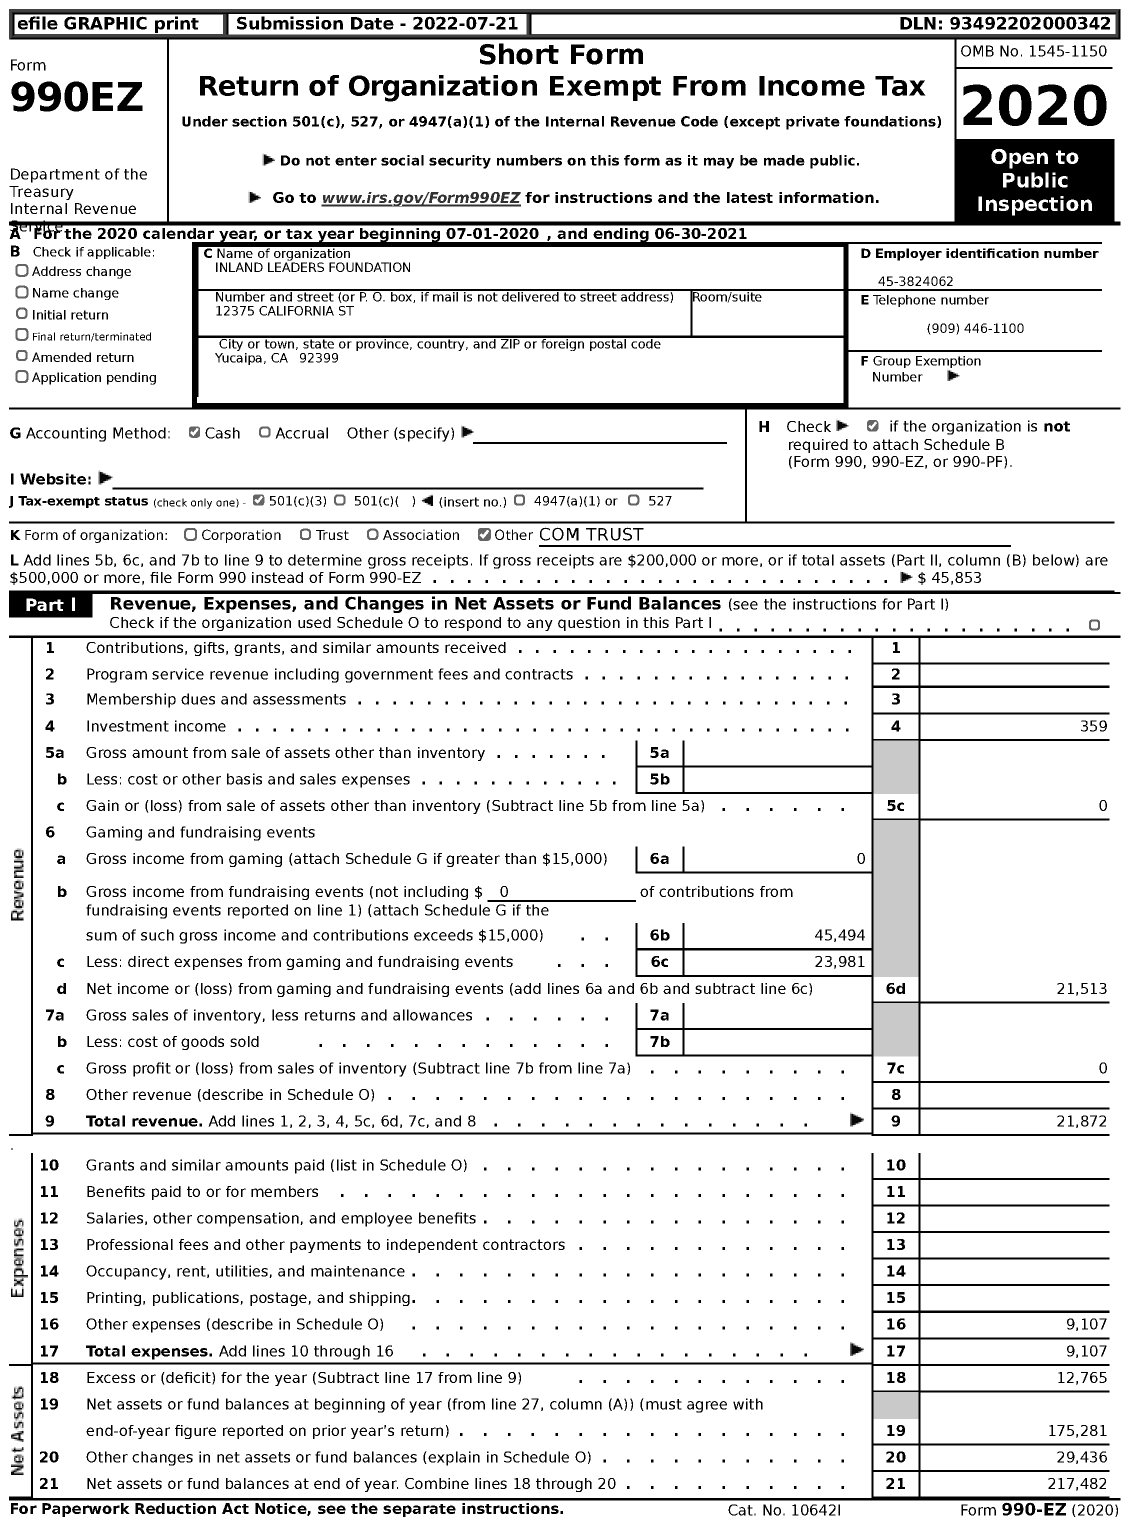 Image of first page of 2020 Form 990EZ for Inland Leaders Foundation (ILF)